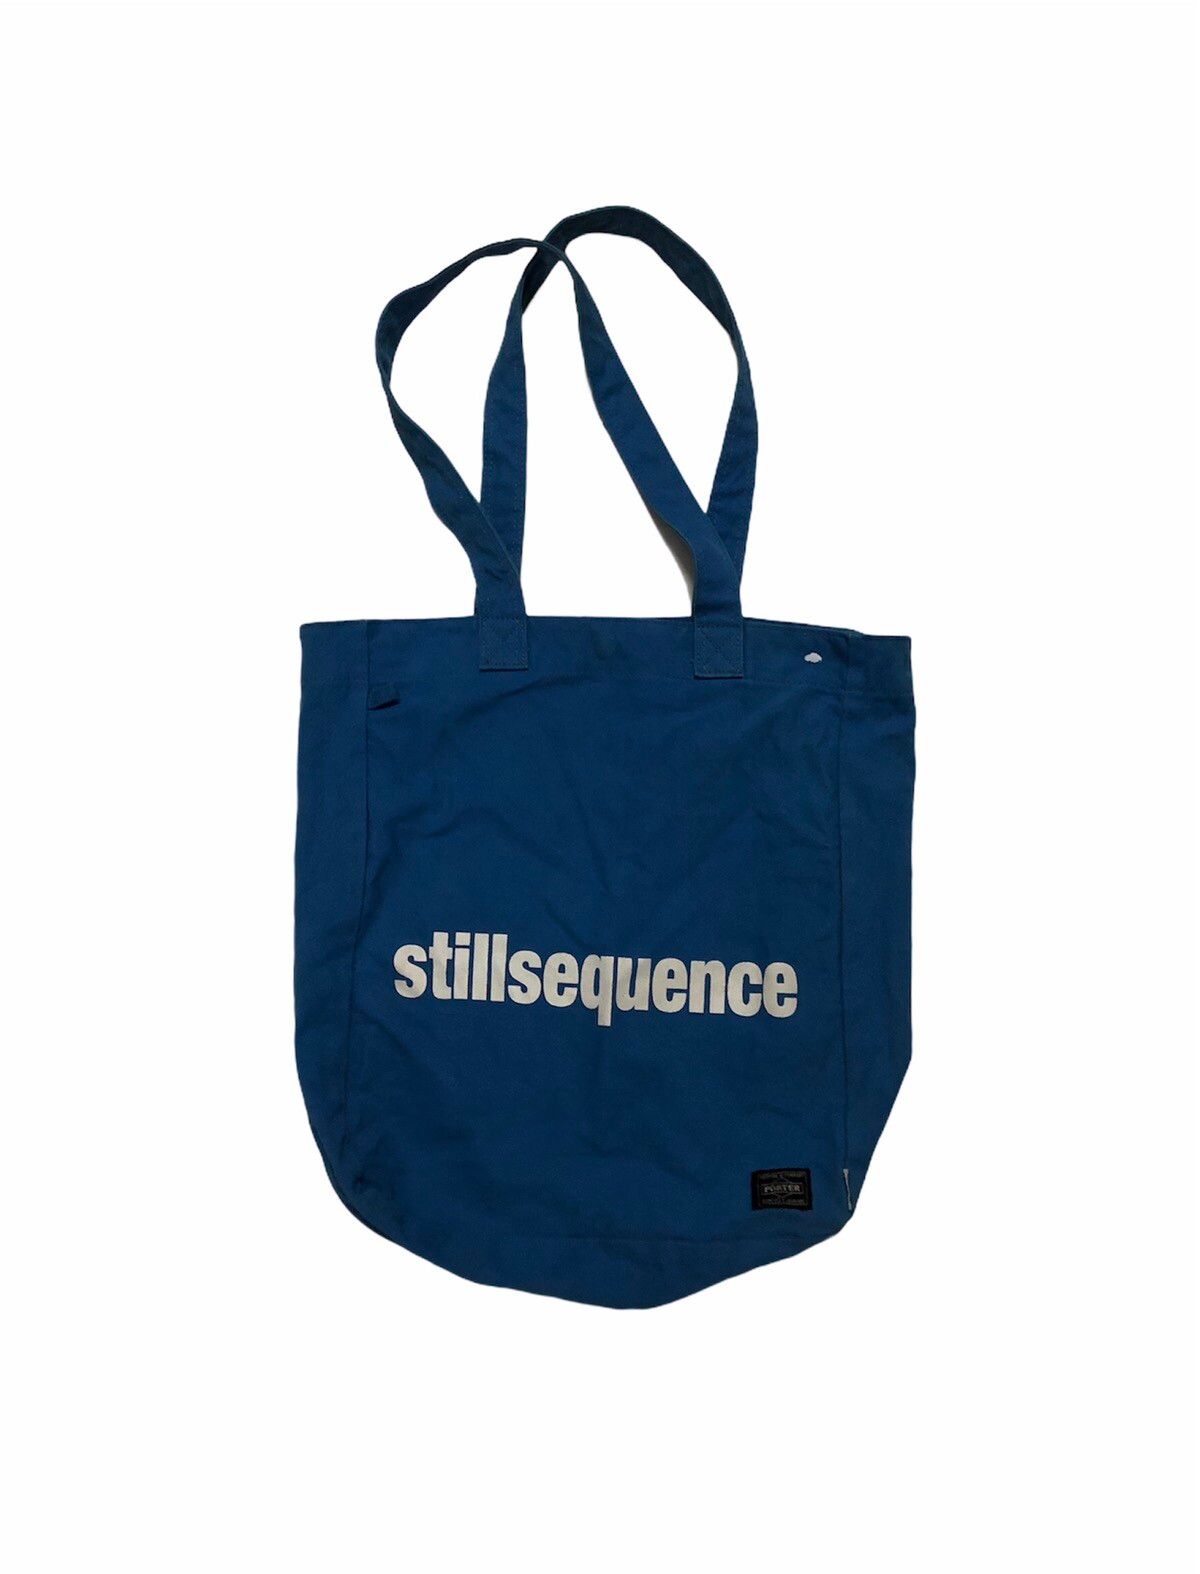 Porter X Gallery 1950 Quote Stillsequence Tote Bag - 1